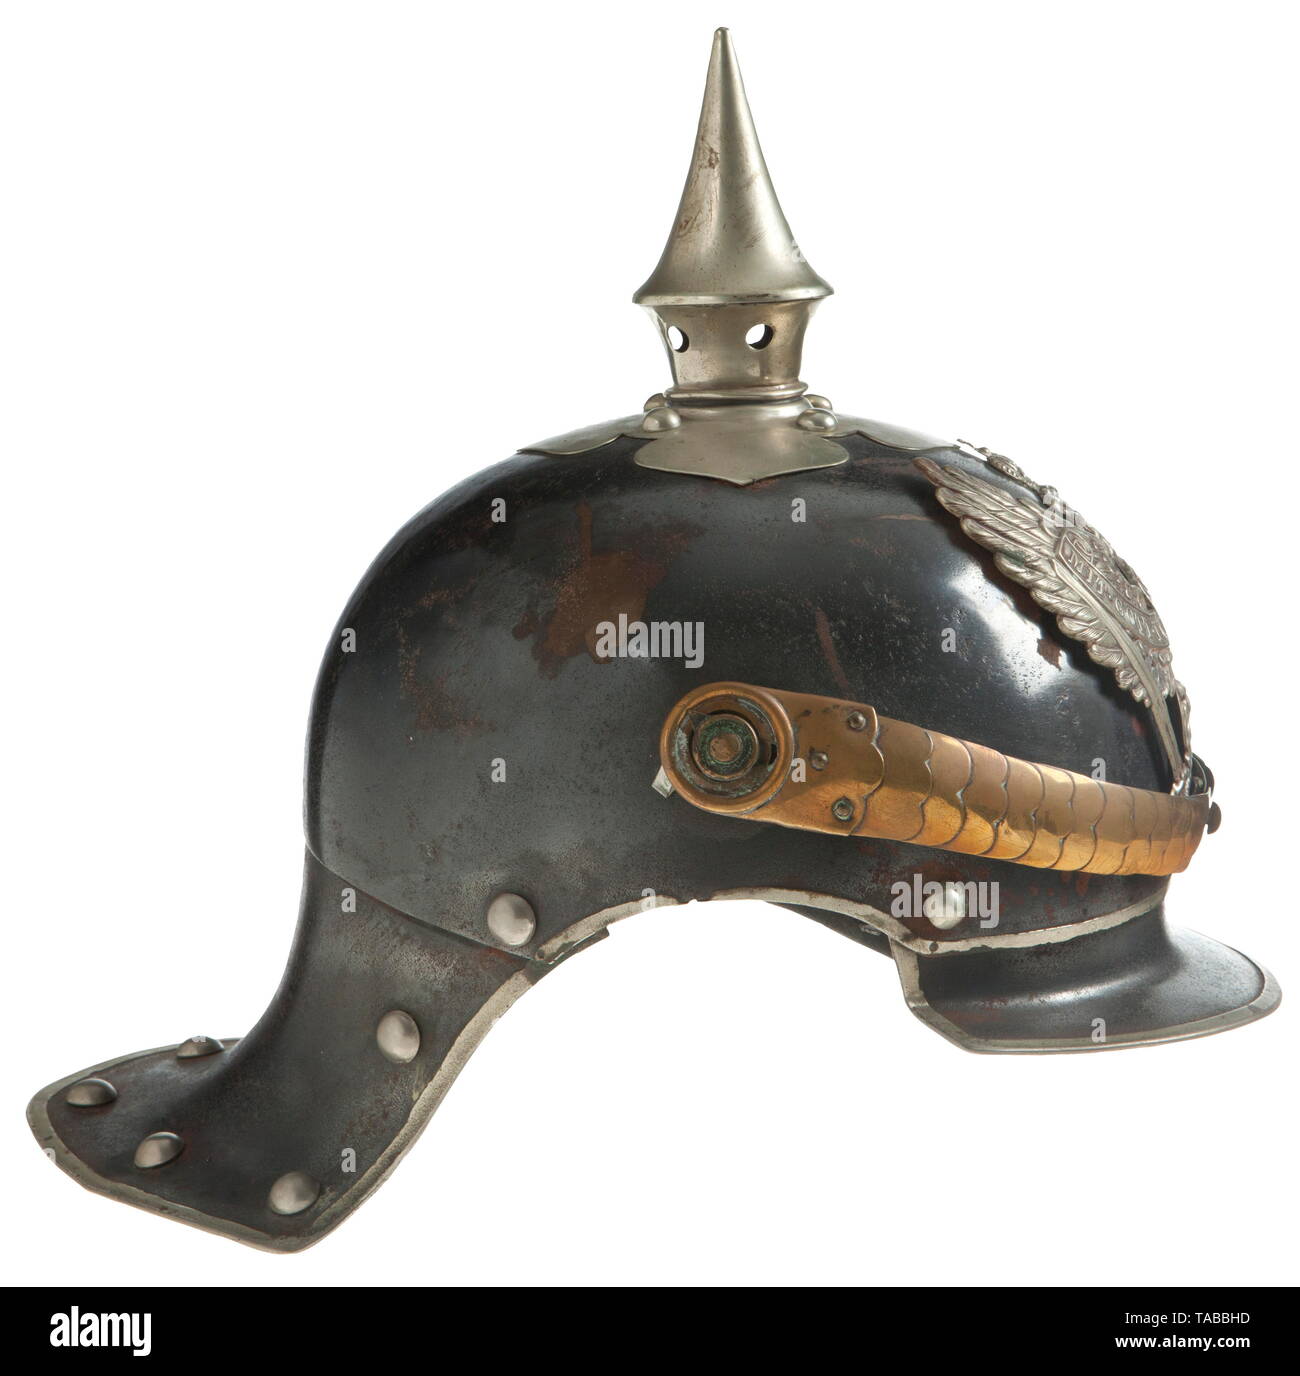 An Imperial German helmet M 1905 for enlisted men of mounted rifles 1-4 regiments Metal lobster tail body with blued finish showing some rust and pitting, body dated '1914' and maker marked, black leather lining, bright silver dragoon eagle front plate attached by loops with leather straps, silver spike, cross base and body trim, large rounded brass chinstraps and 91 lugs, extra mounting holes in body behind 91 lugs, missing cockades. USA-lot, see page 4. historic, historical, Prussian, Prussia, German, Germany, militaria, military, object, objec, Additional-Rights-Clearance-Info-Not-Available Stock Photo